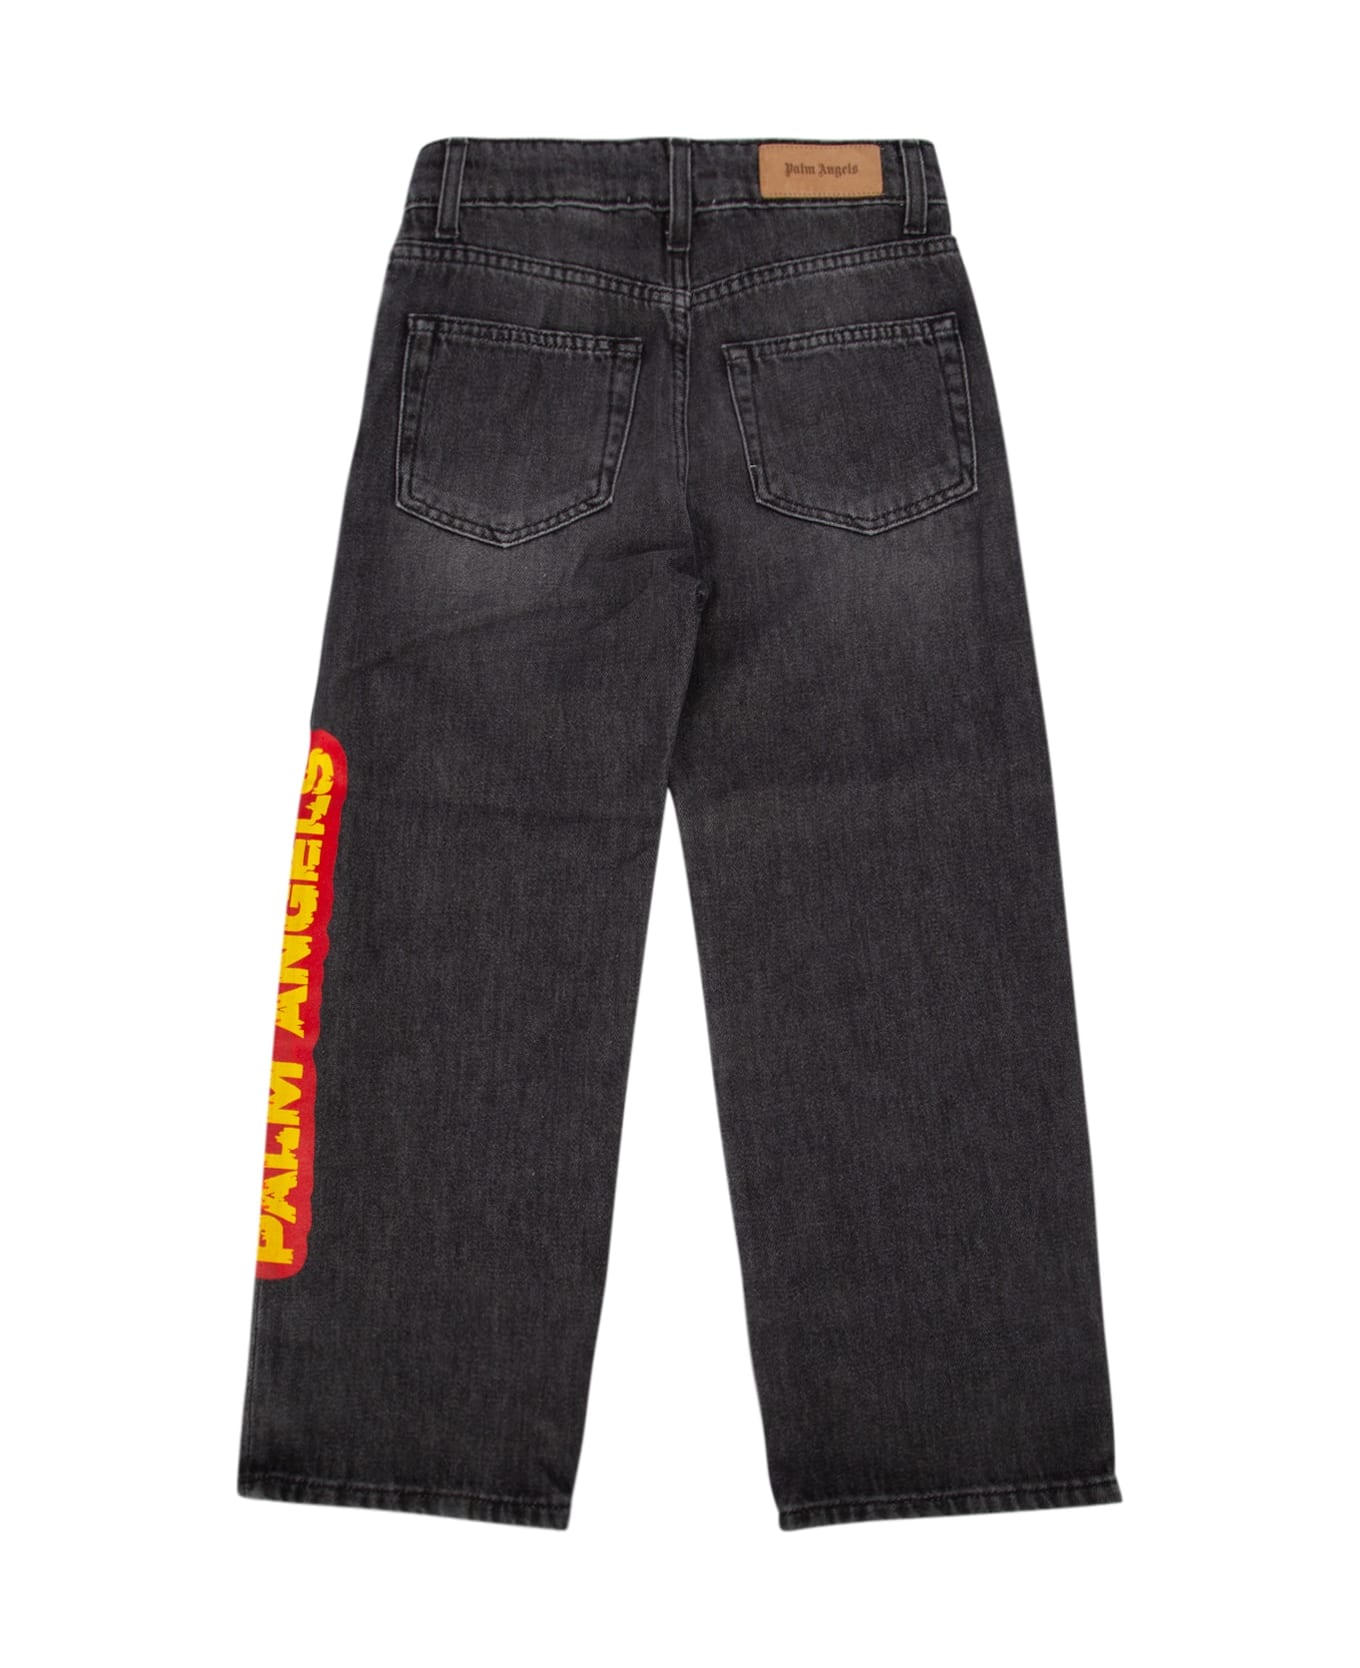 Palm Angels Jeans - BLACKRED ボトムス